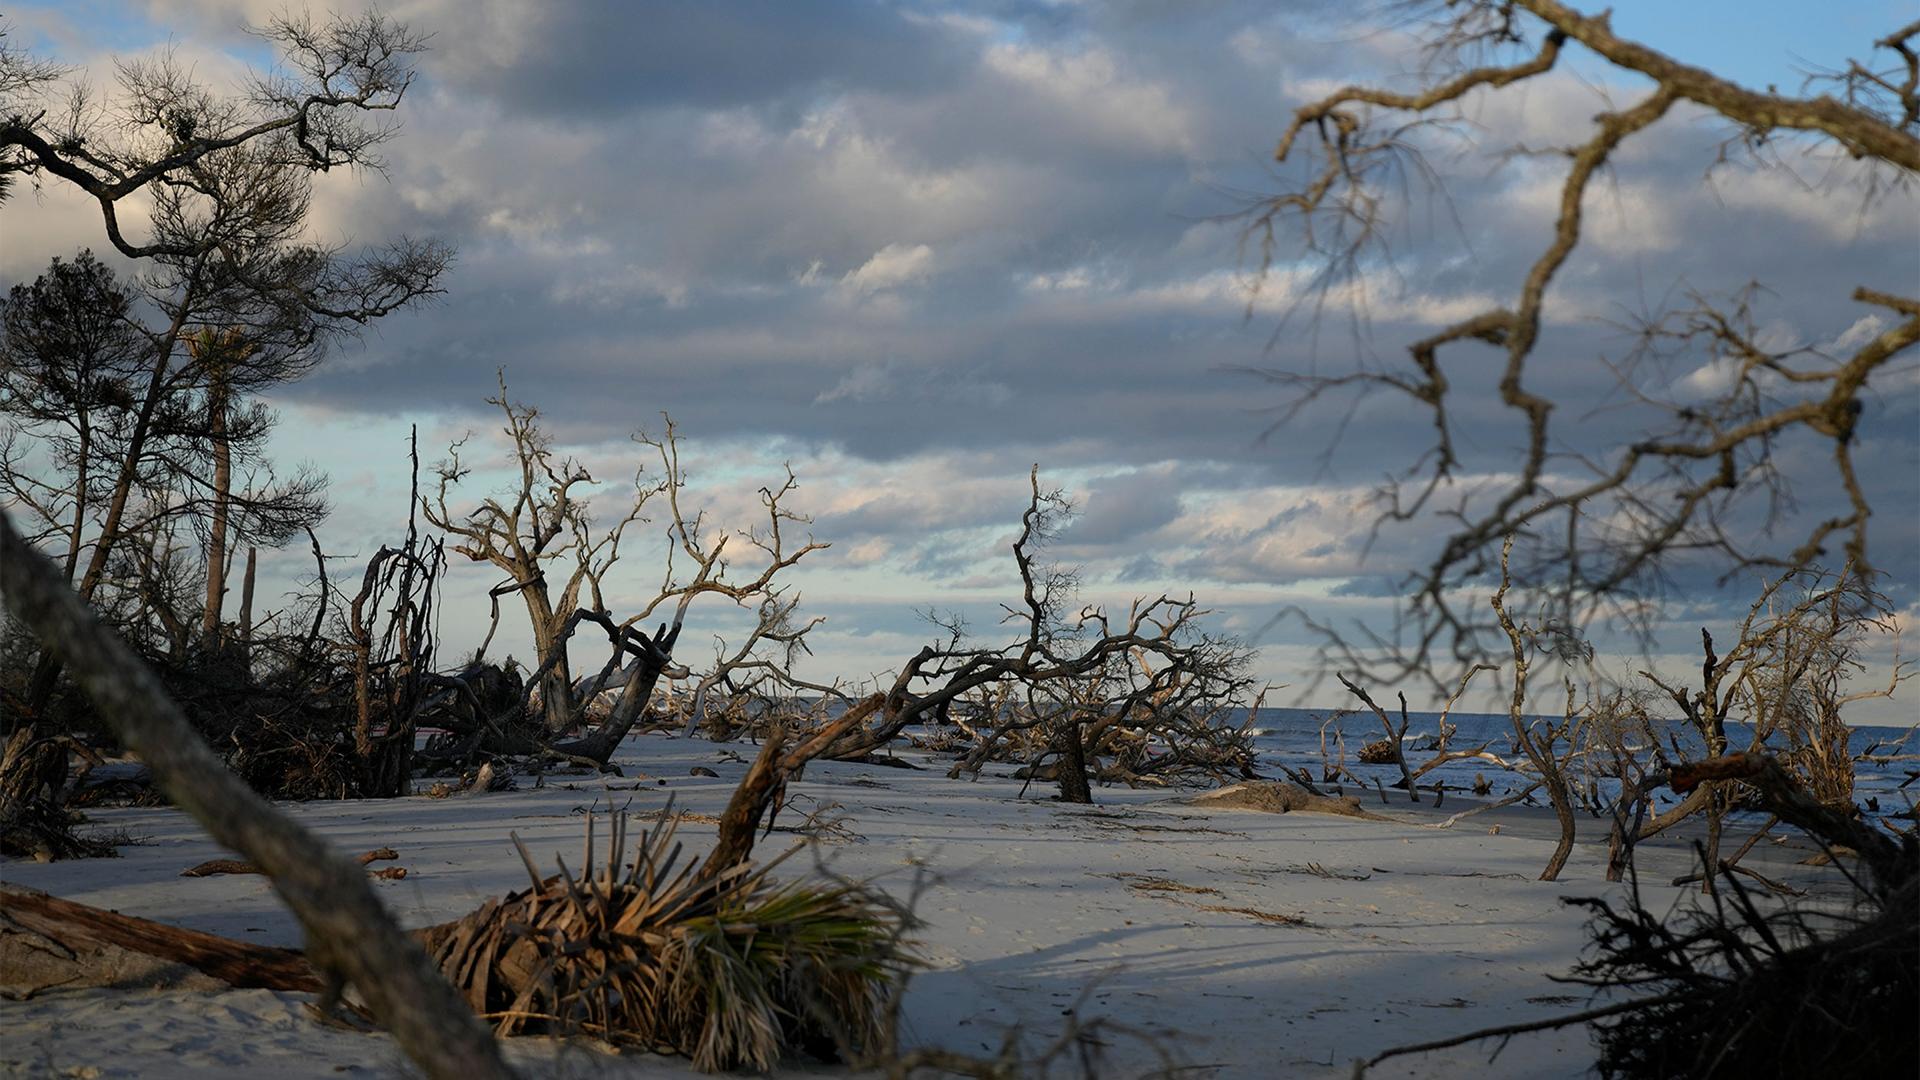 Dead trees stand on the beach and in the ocean at "The Boneyard," created by beach erosion and fierce storms, in Hunting Island State Park on Hunting Island, S.C., in the United States